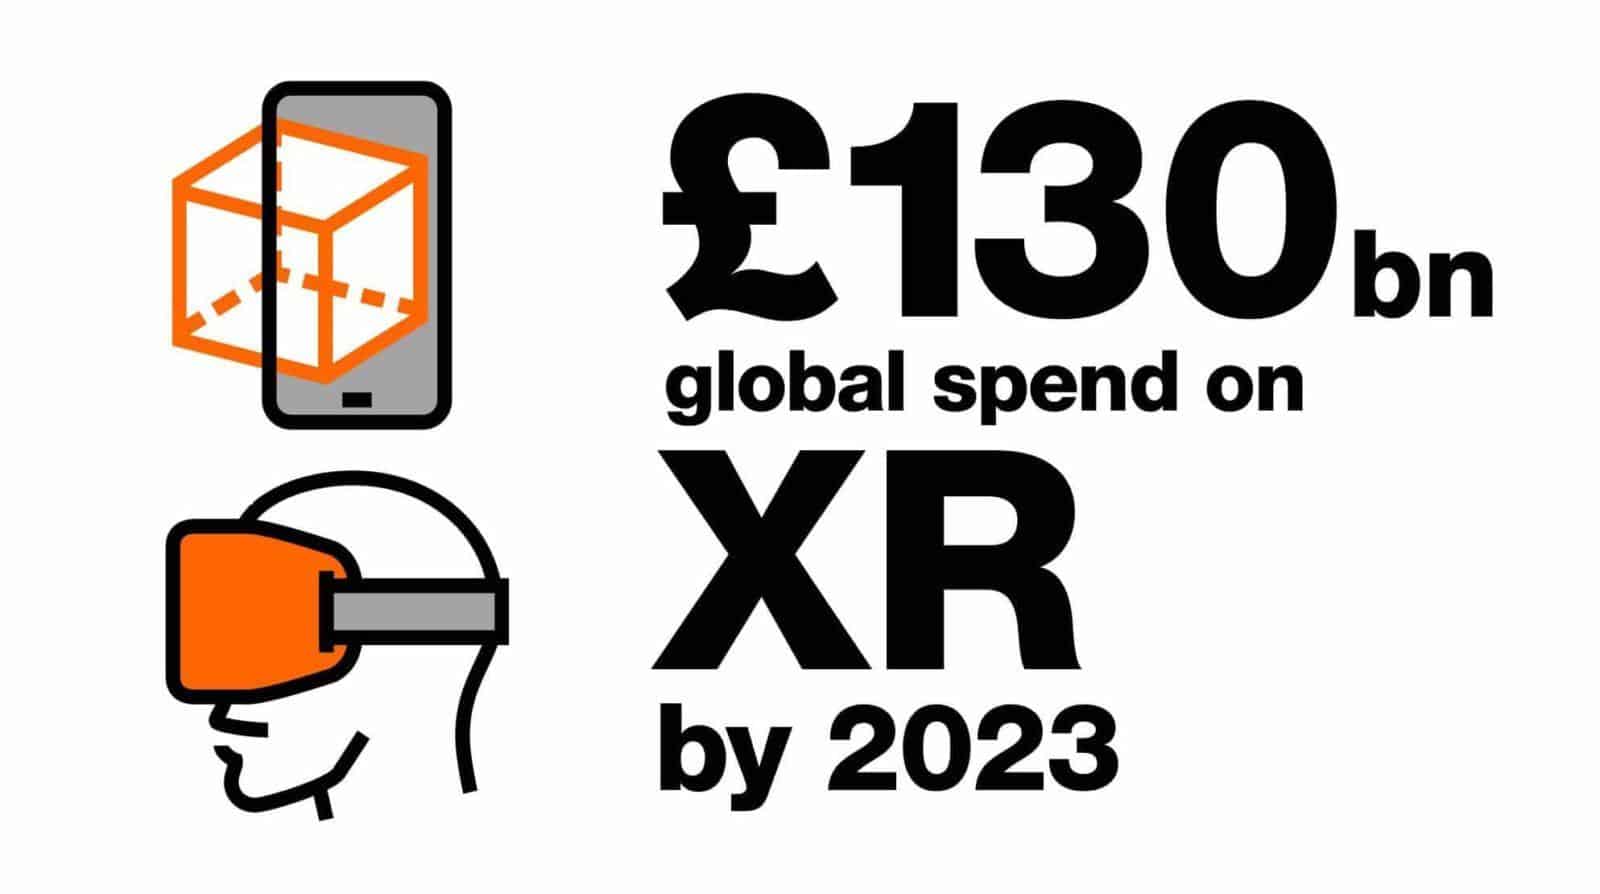 Global spend on XR for virtual events